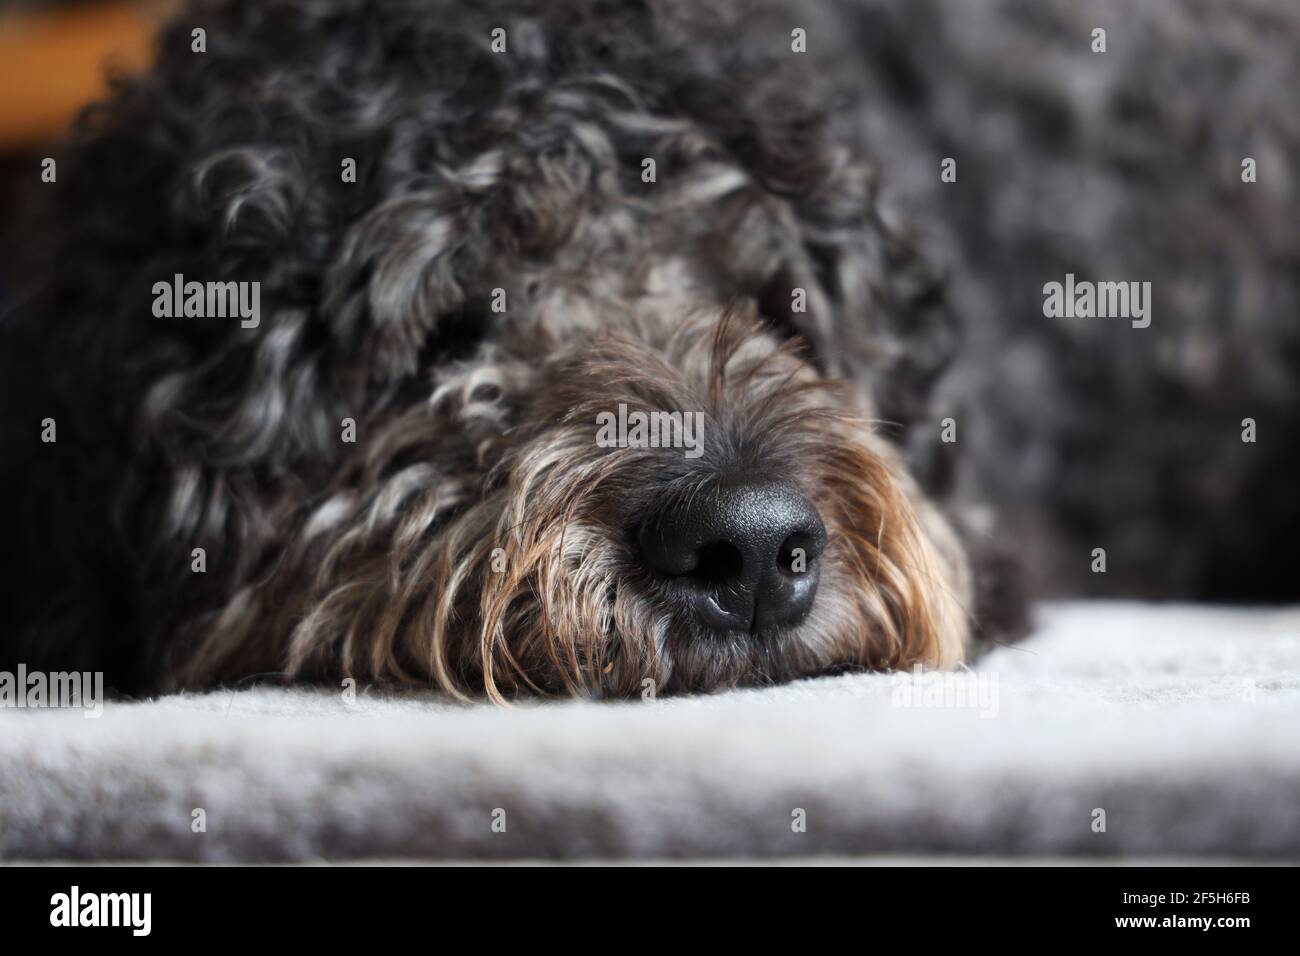 Dogs nose, Labradoodle Stock Photo